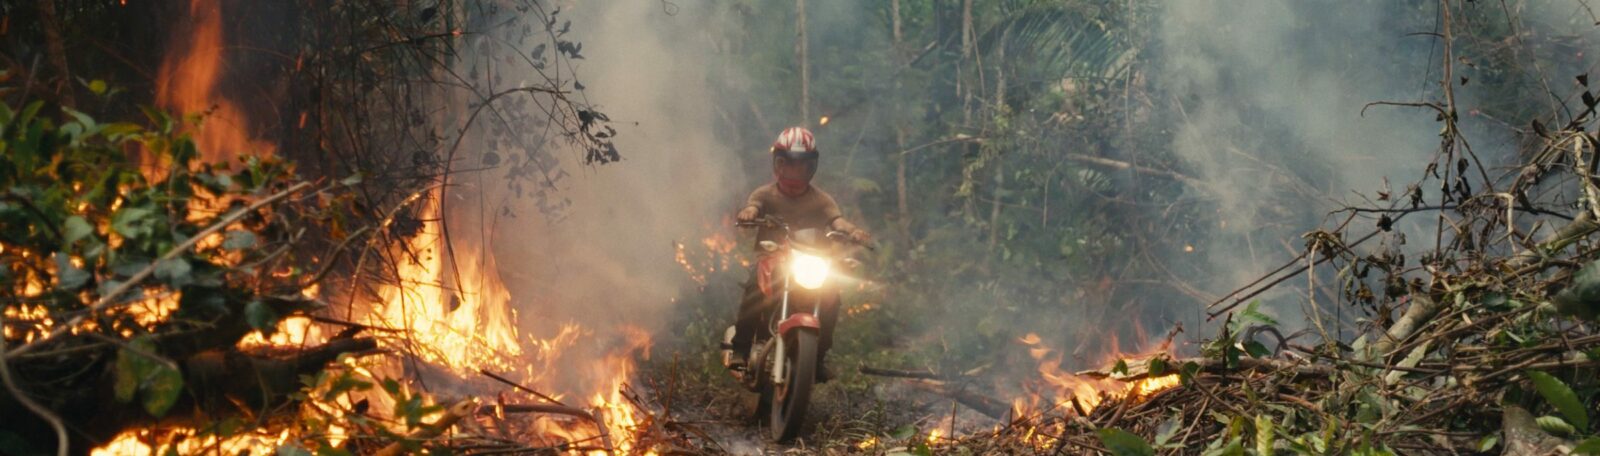 A motorcycle racing through a burning forest.